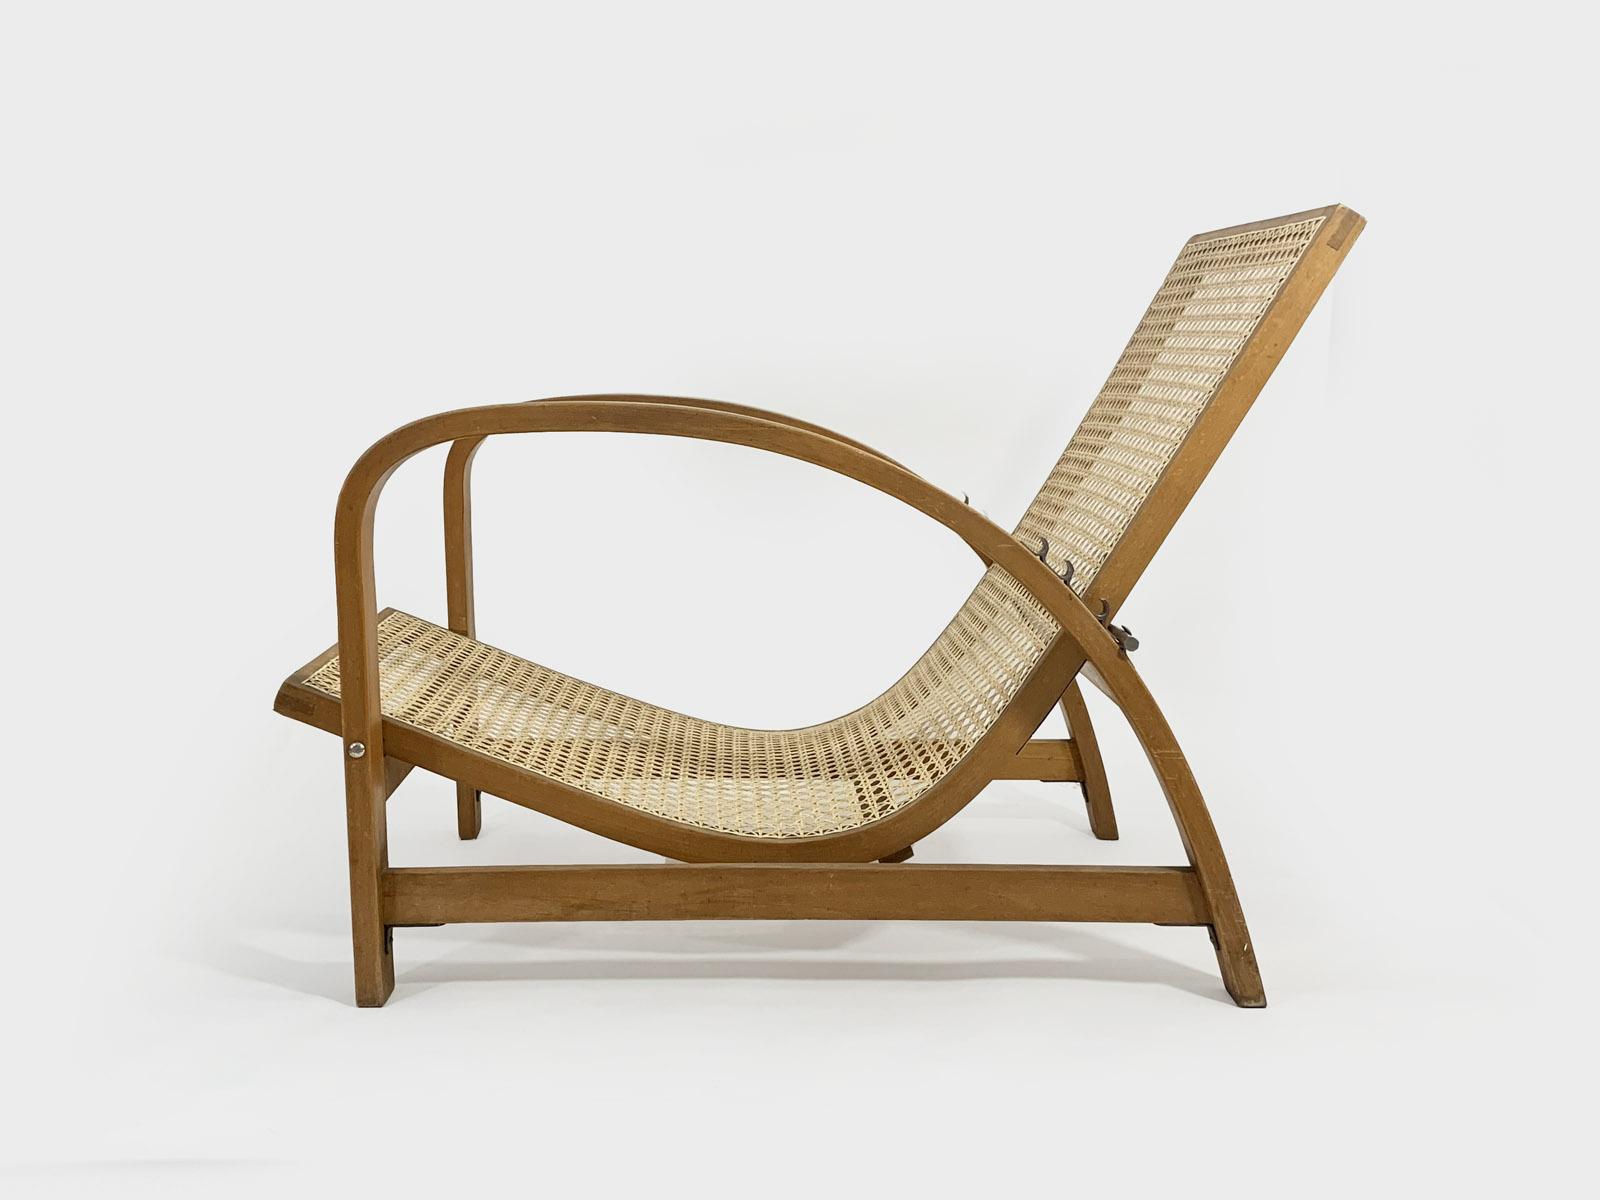 Jindrich Halabala Reclining Chair in Wood and Cane, 1930s In Good Condition For Sale In Tarnowskie Gory, Sląskie